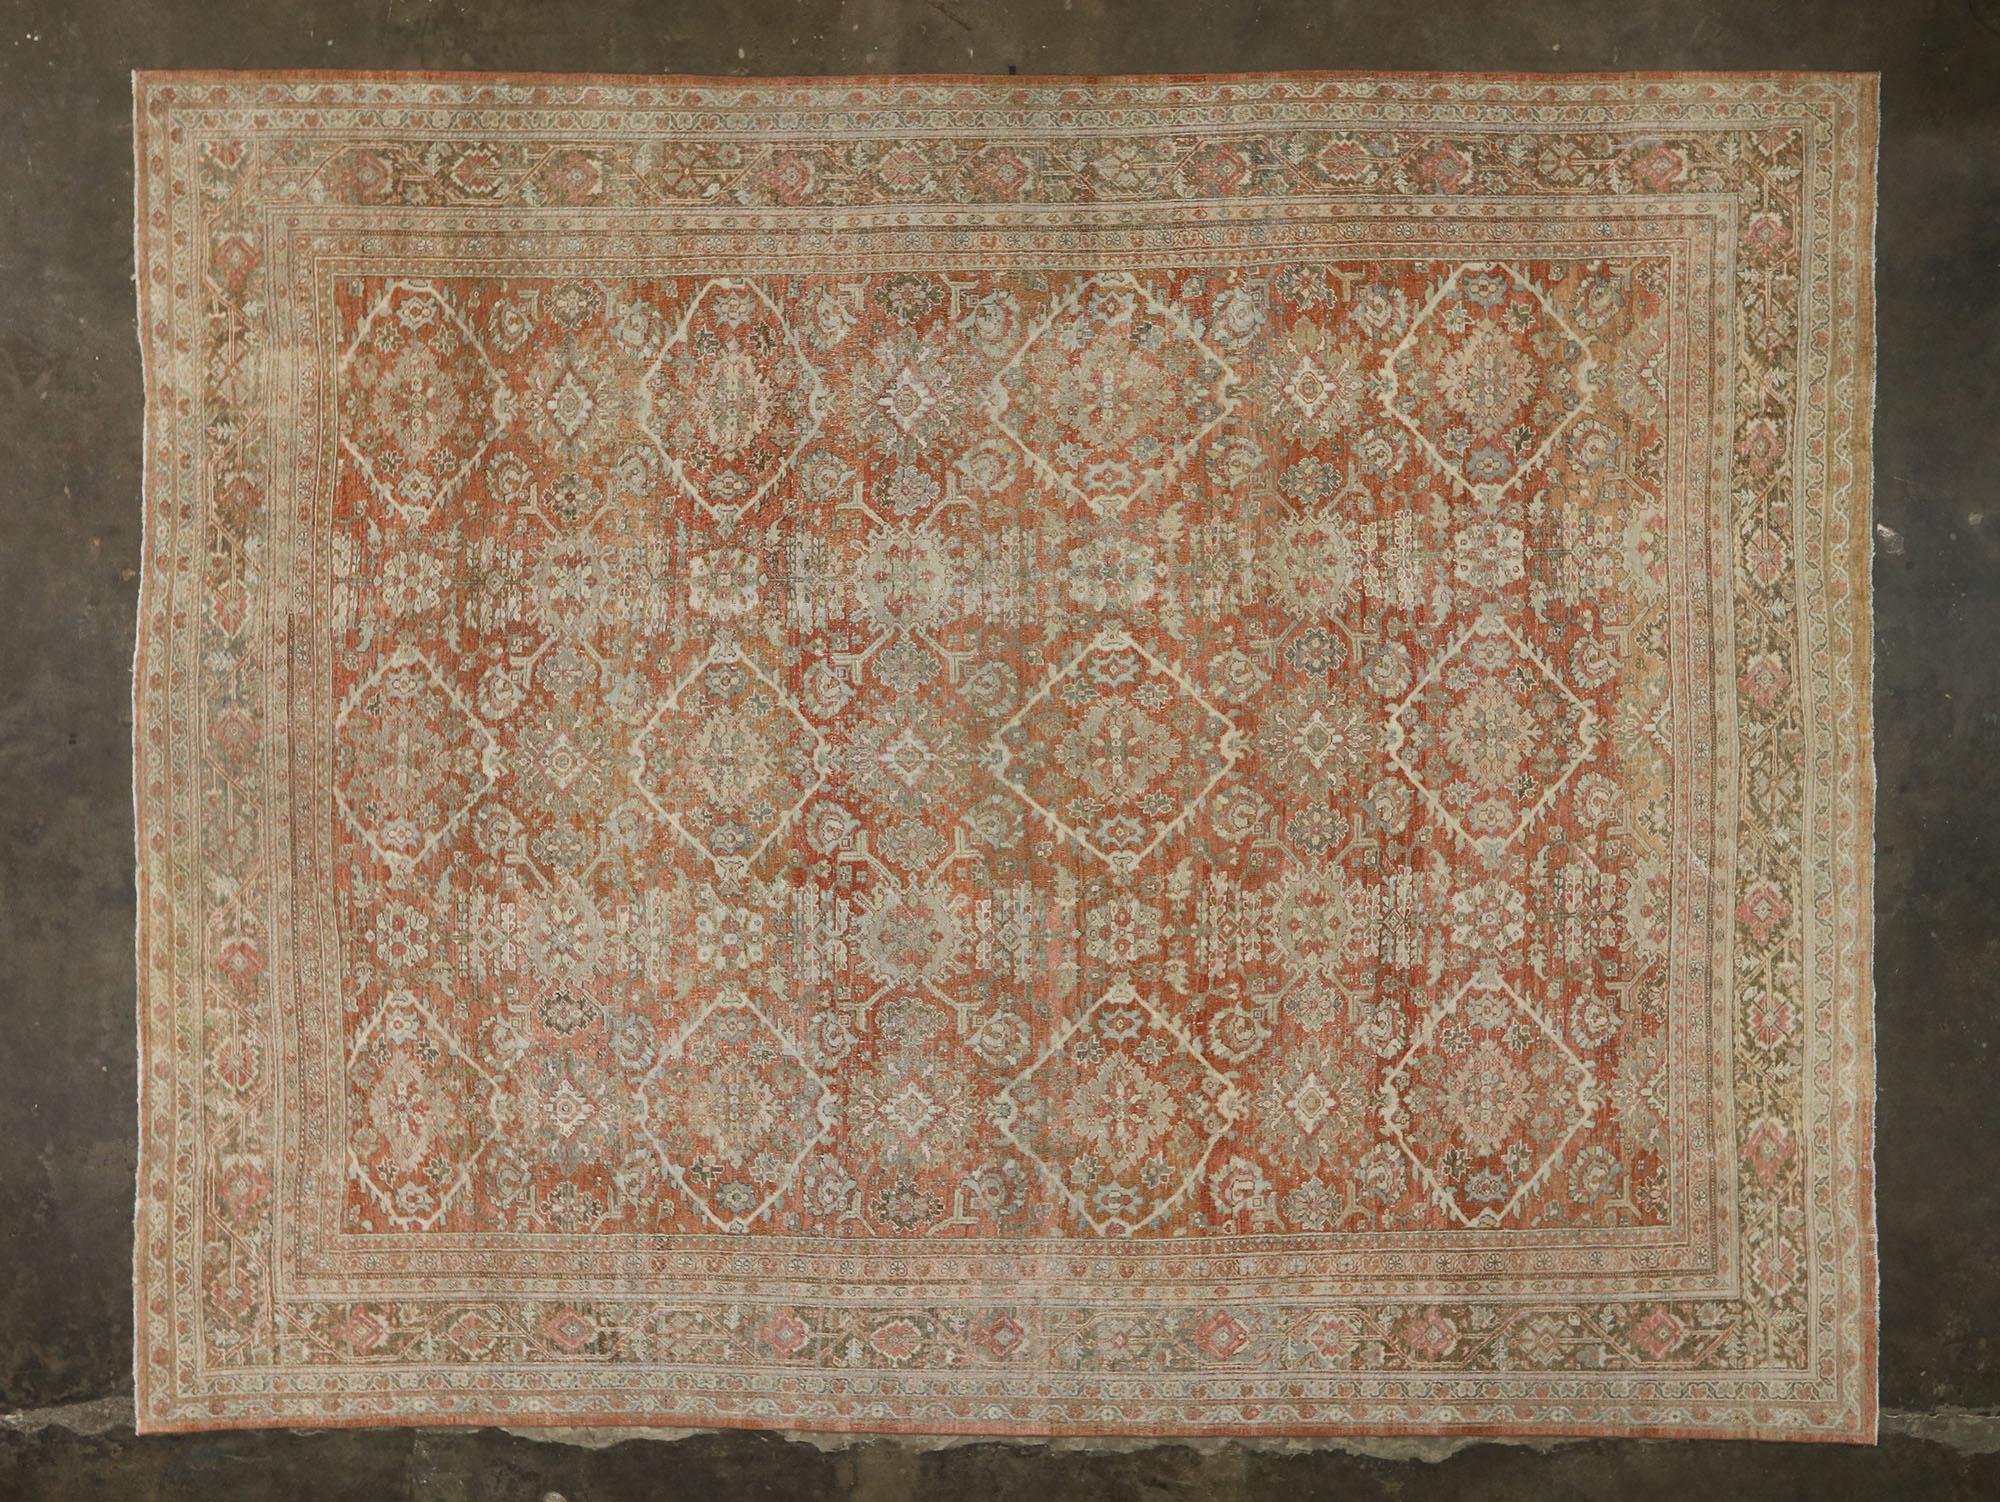 Distressed Antique Persian Mahal Rug with Rustic Spanish Mission Style 3